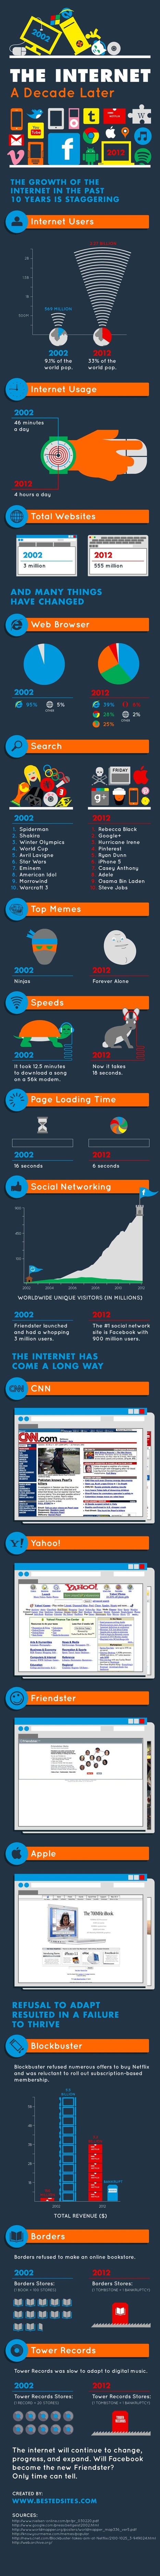 Internet Decade Later - Infographic... | Science News | Scoop.it